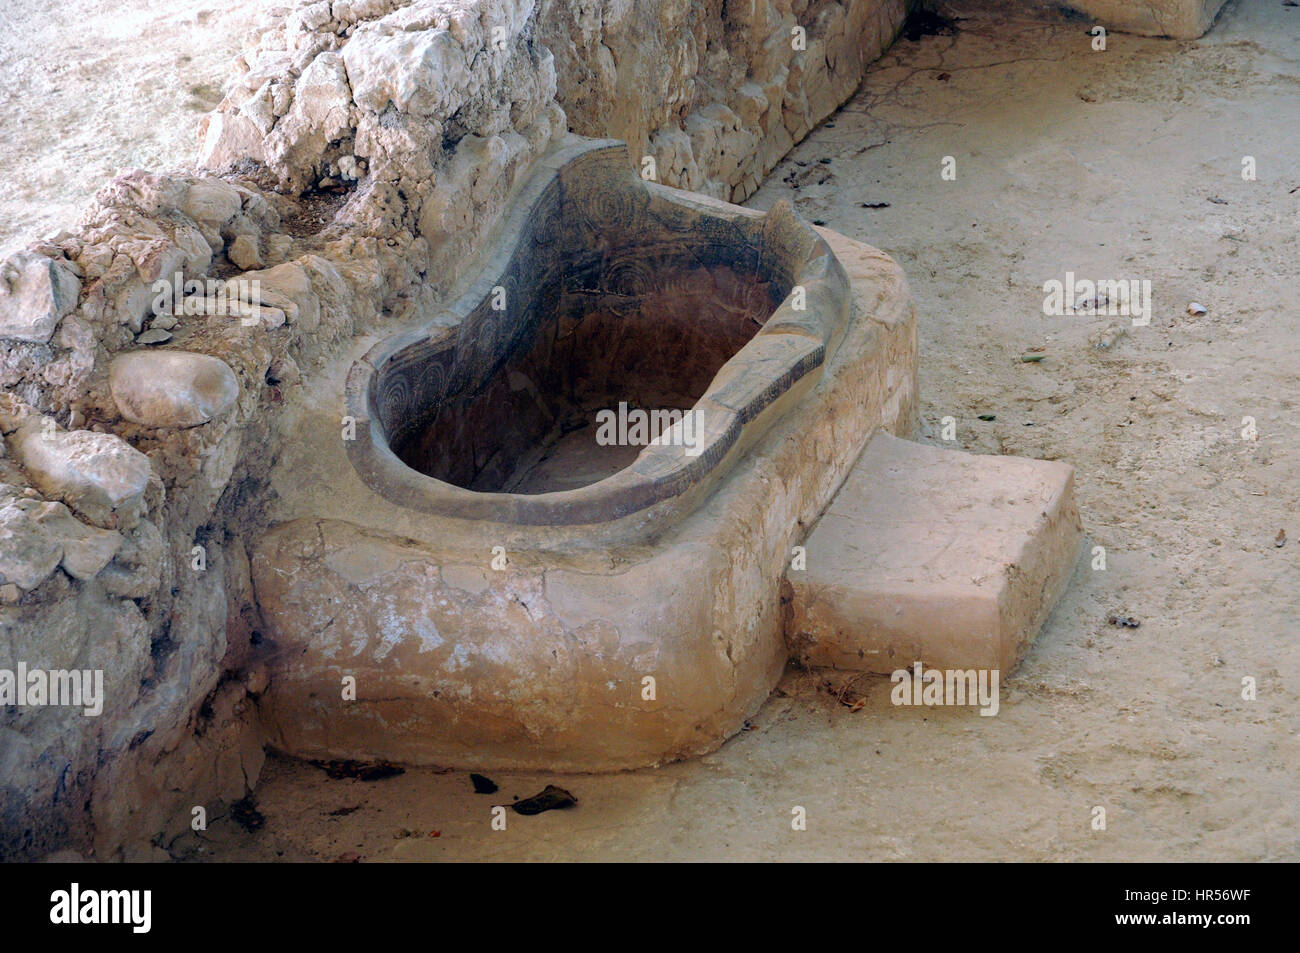 The bath Nestor's palace where, accorning to Homer, Polycaste, daughter of King Nestor bathed Telemachus, the son of Odysseus. Stock Photo